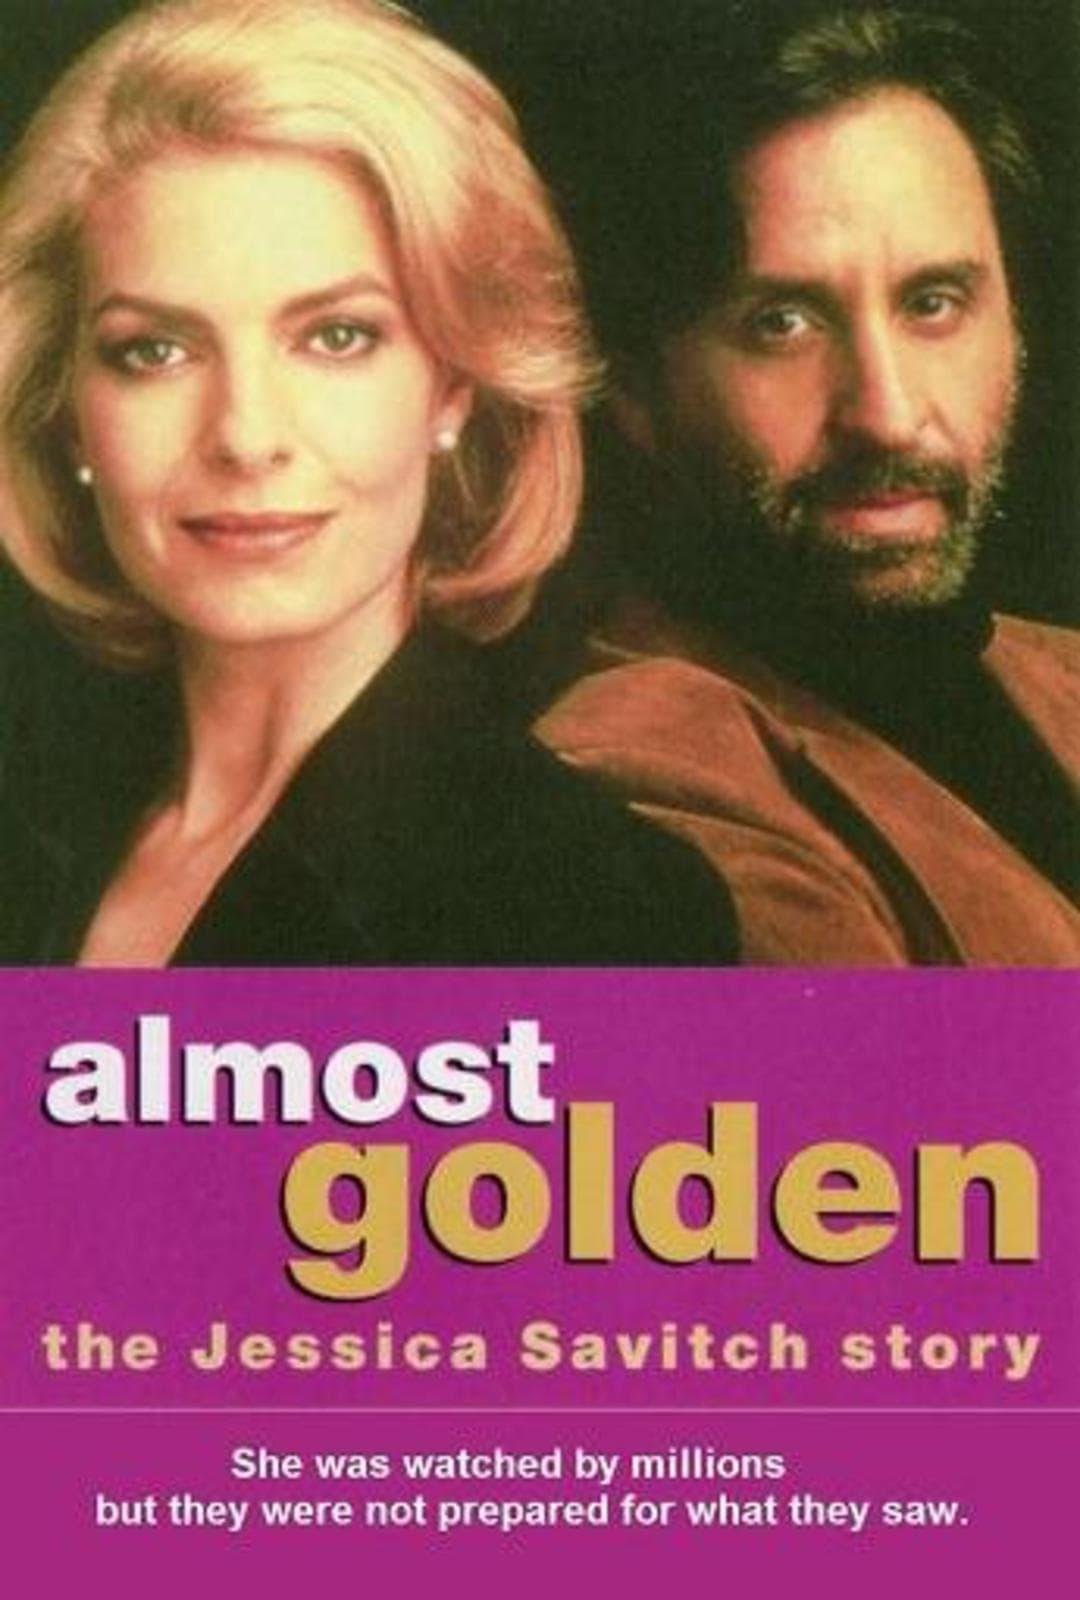 Almost Golden: The Jessica Savitch Story poster